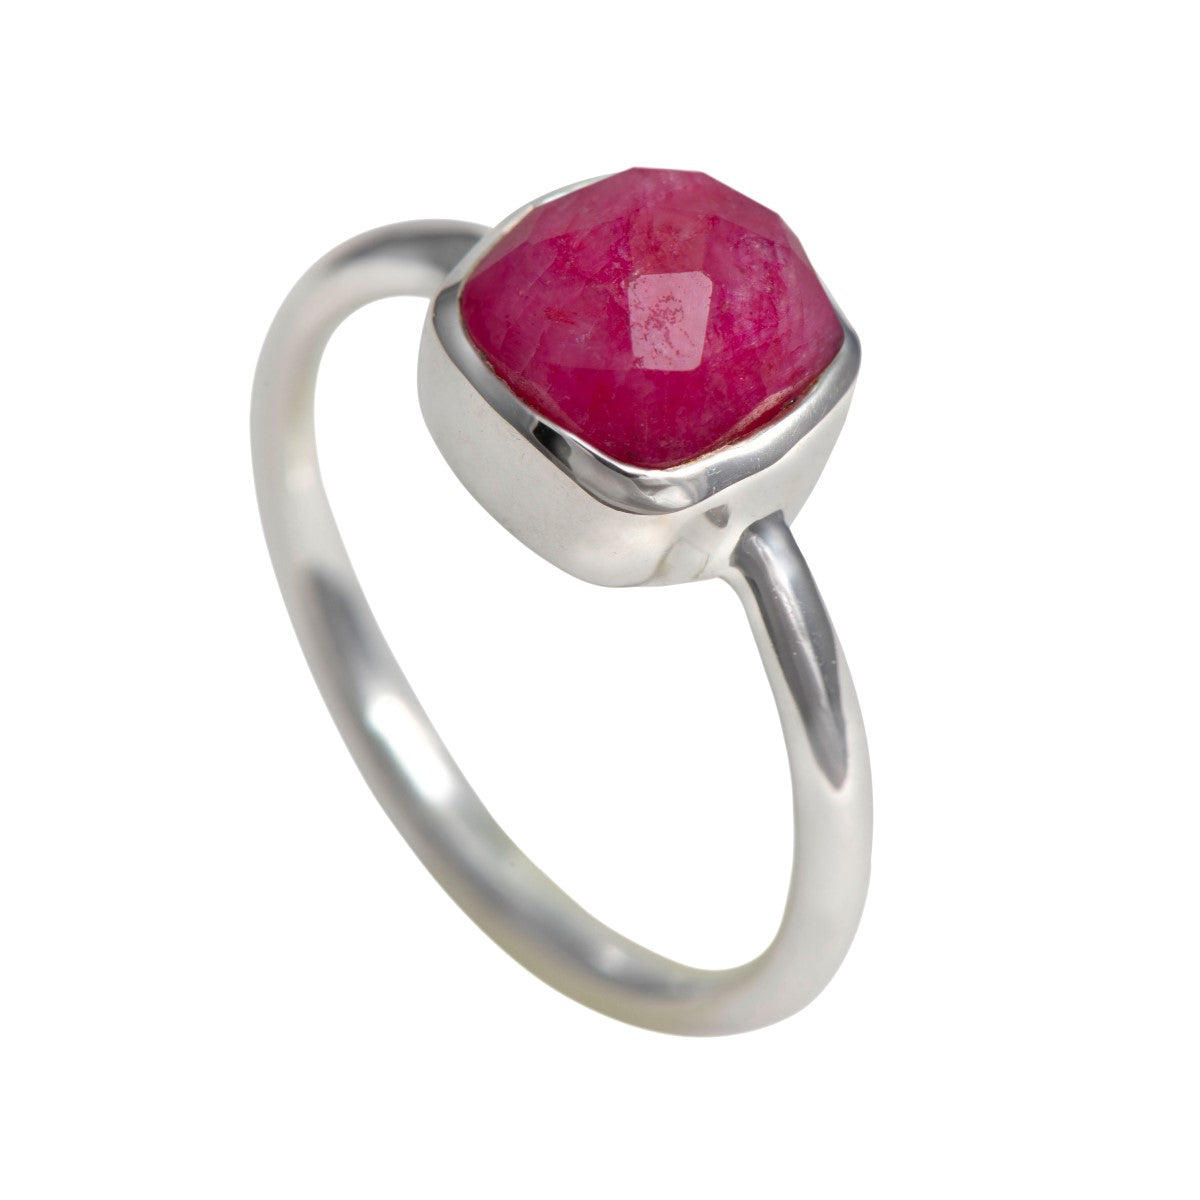 Faceted Square Cut Natural Gemstone Sterling Silver Solitaire Ring - Ruby Quartz